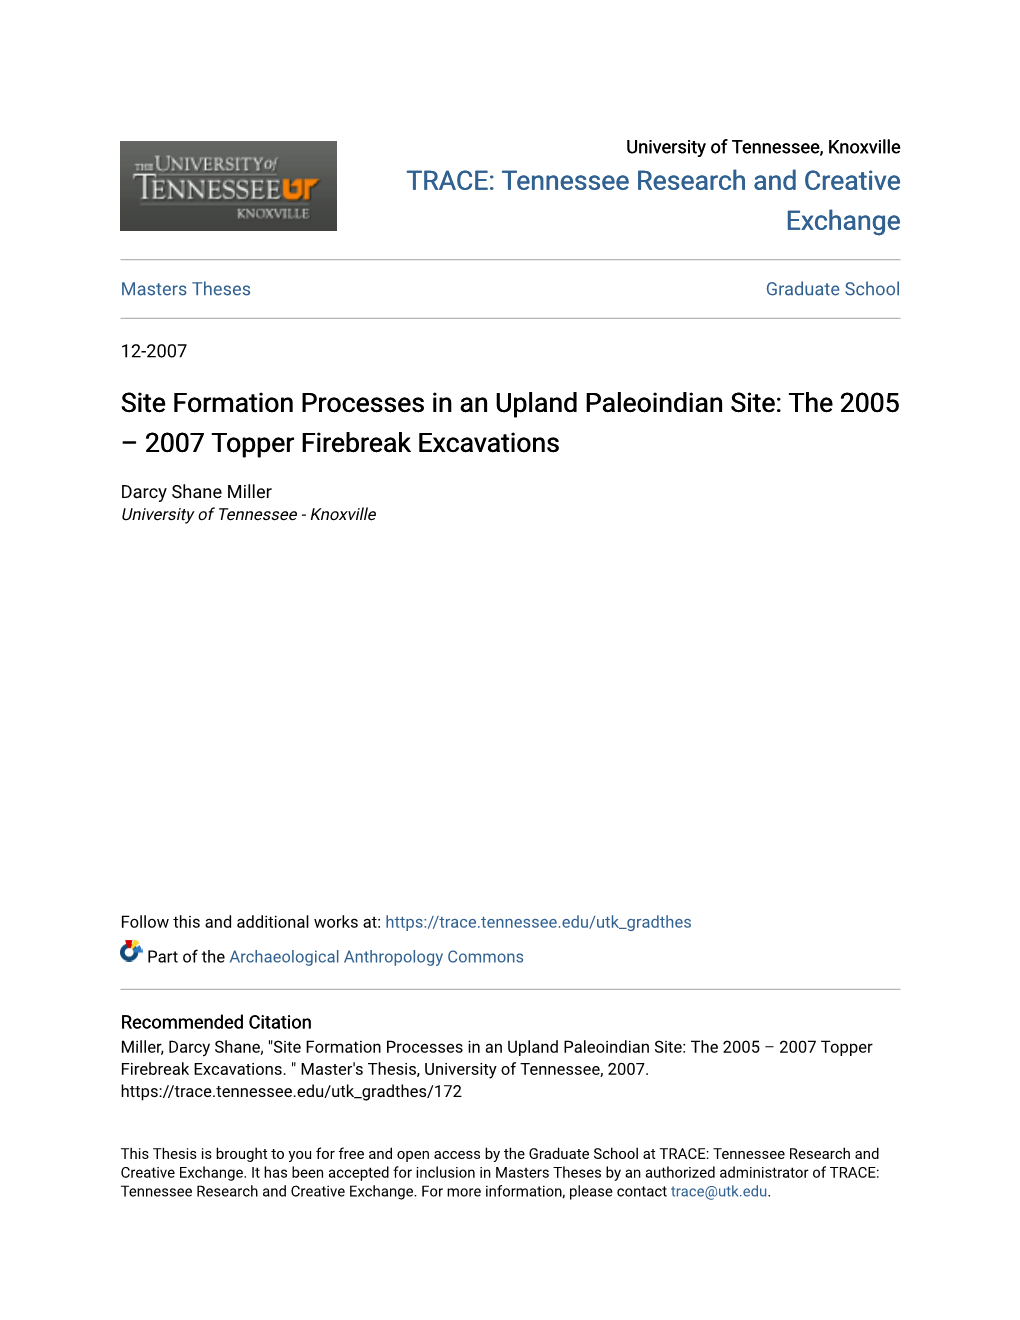 Site Formation Processes in an Upland Paleoindian Site: the 2005 – 2007 Topper Firebreak Excavations